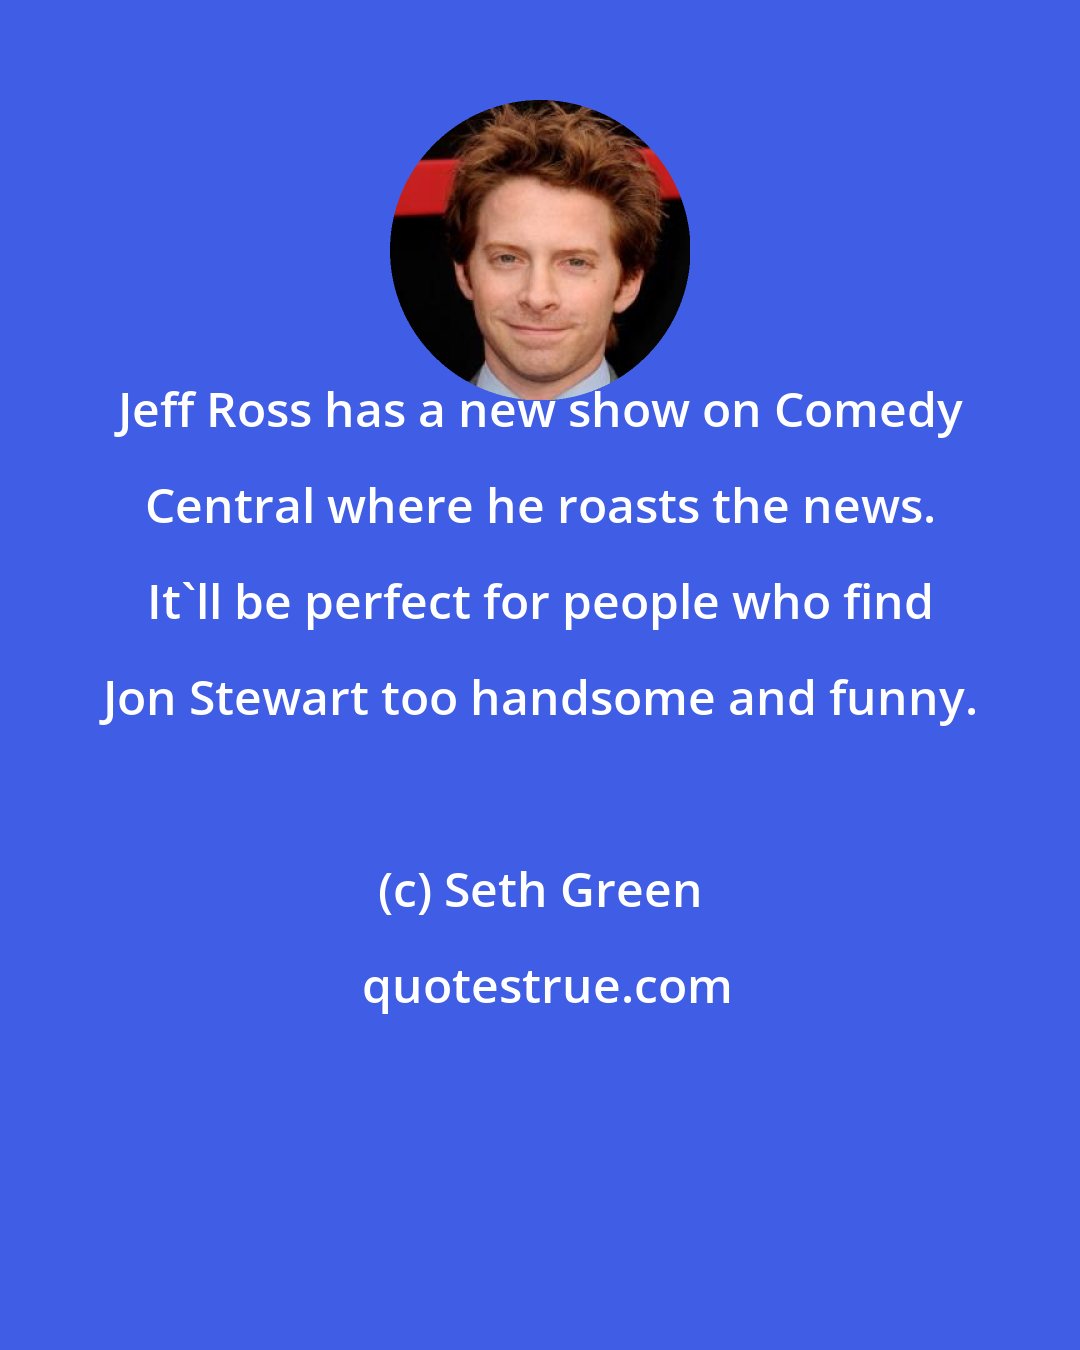 Seth Green: Jeff Ross has a new show on Comedy Central where he roasts the news. It'll be perfect for people who find Jon Stewart too handsome and funny.